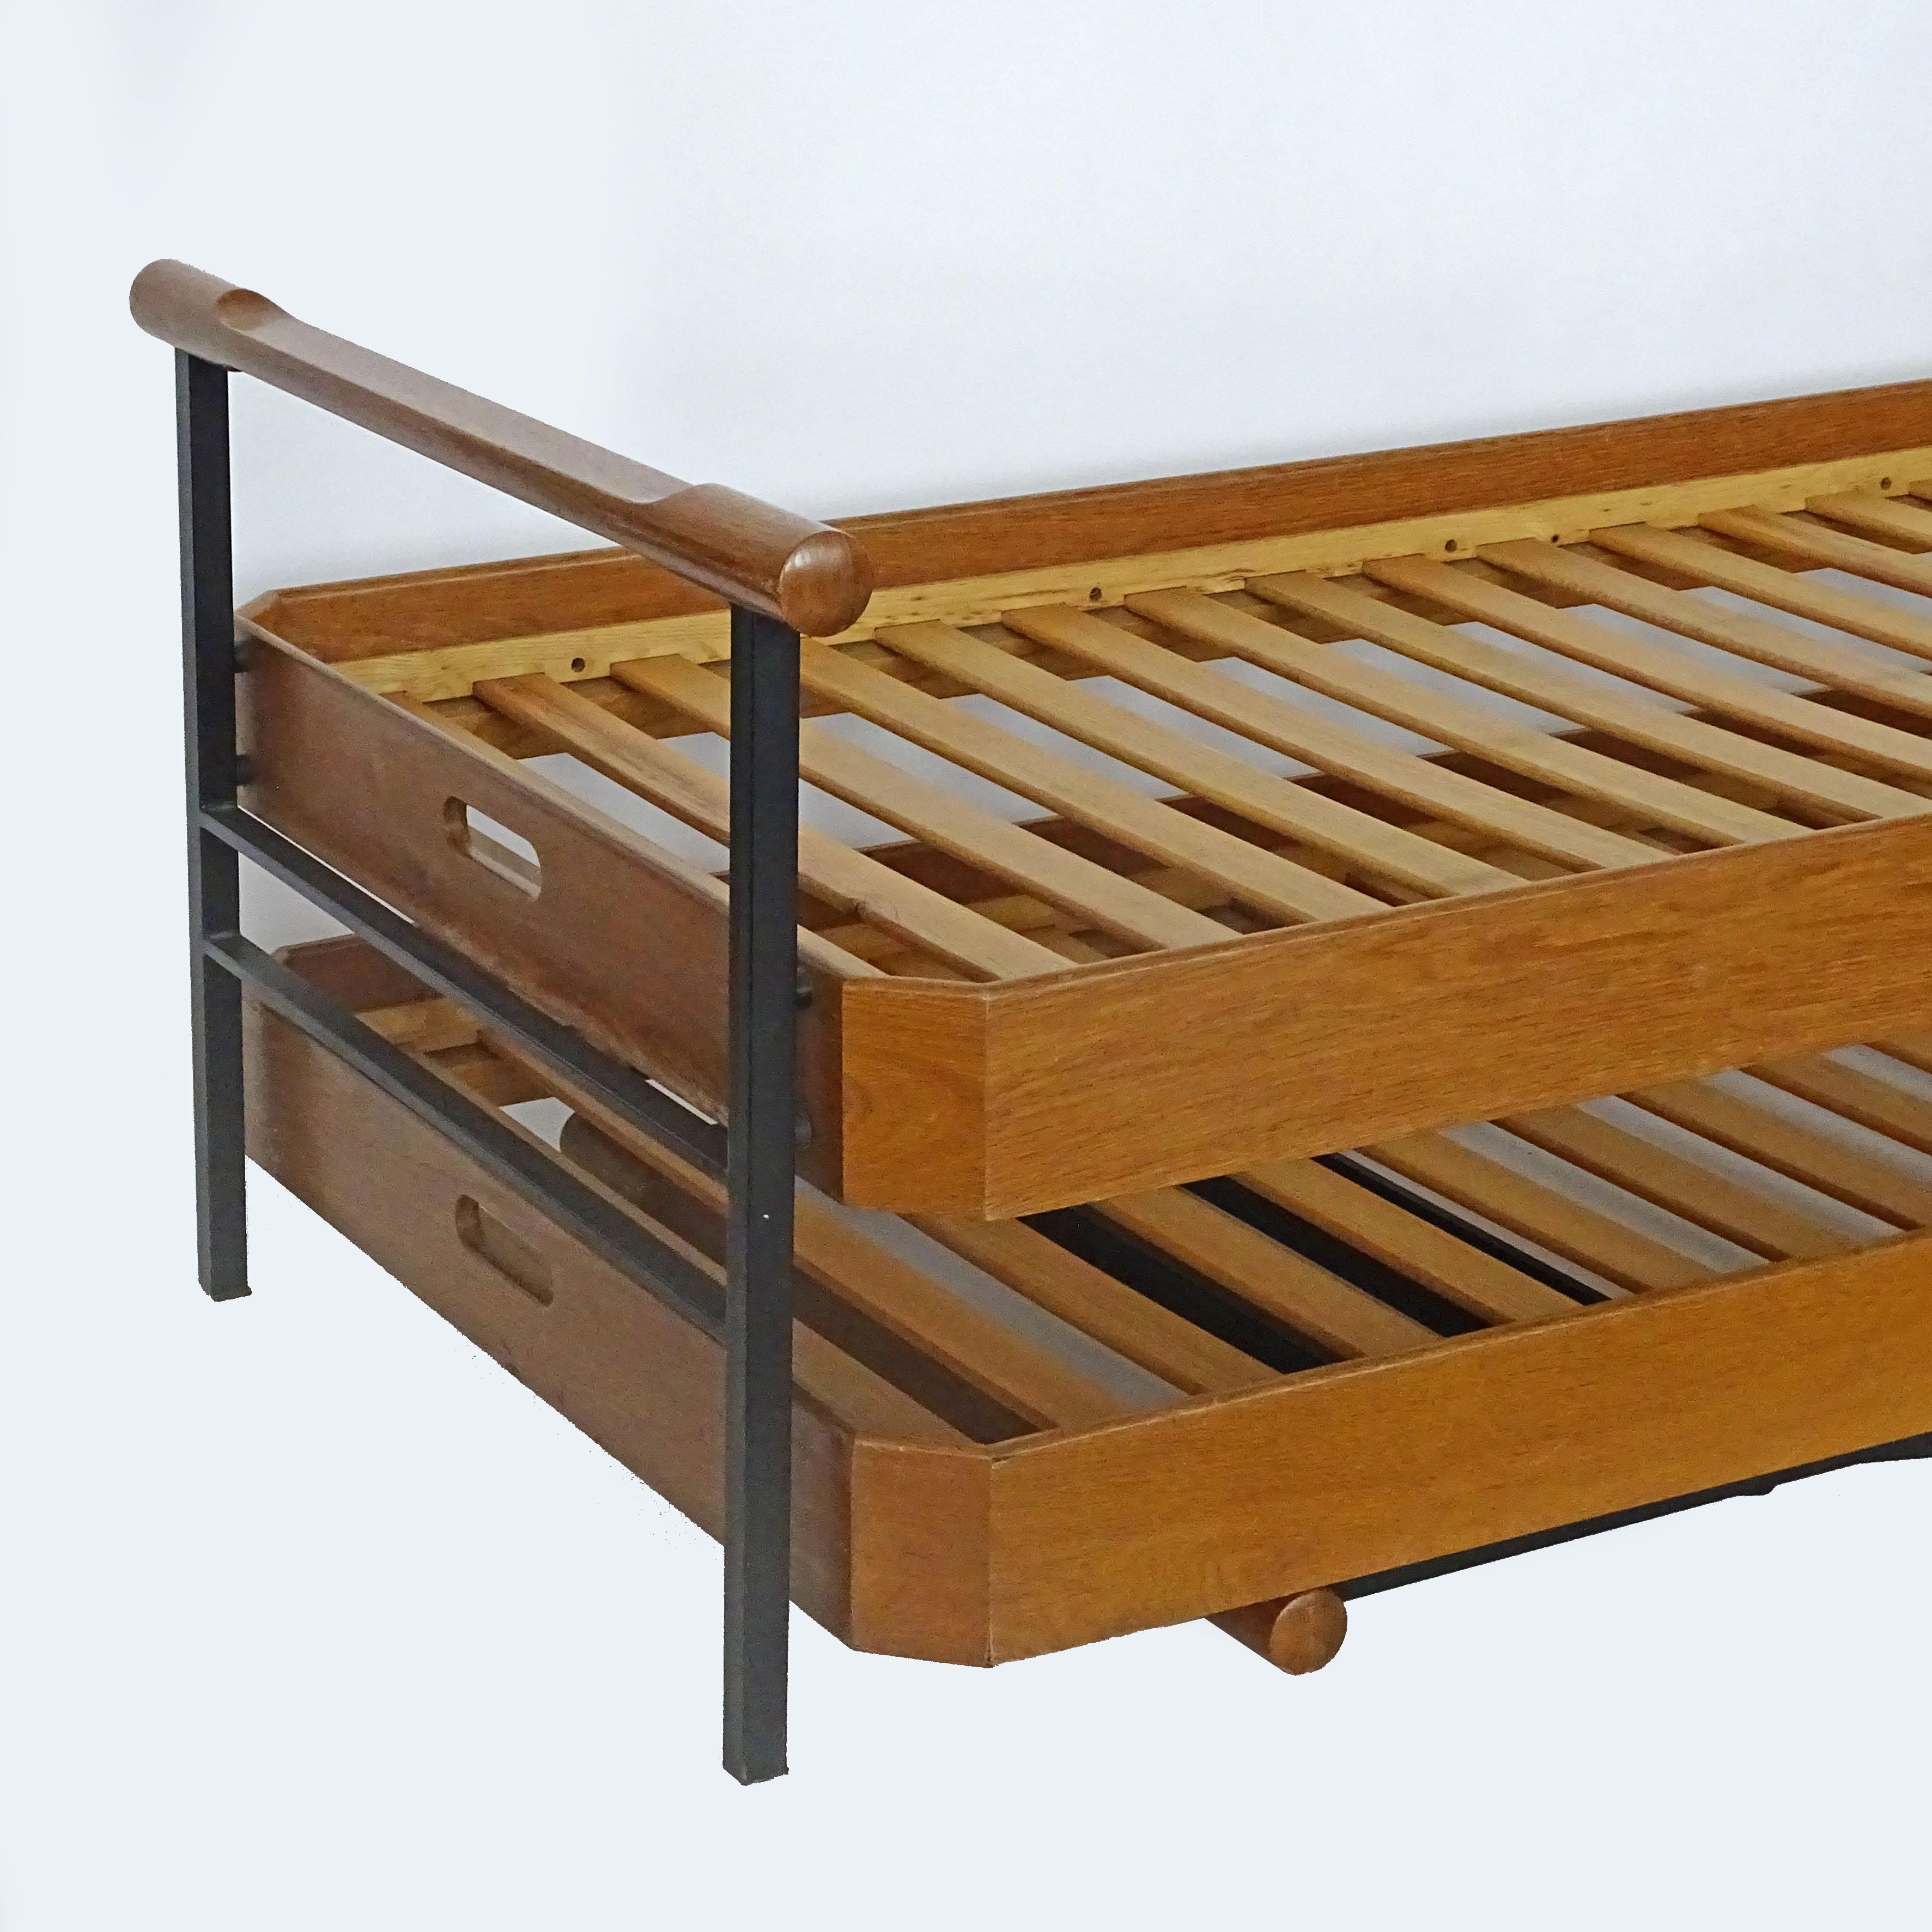 Osvaldo Borsani L75 Trundel Bed / Daybed for Tecno, Italy 1963
In natural wood and black lacquered metal.
The bottom bed slides out on wooden ball wheels to reveal a second bed.
Presented at the XIII Triennale of Milan 1965
Reference: G. Gramigna,